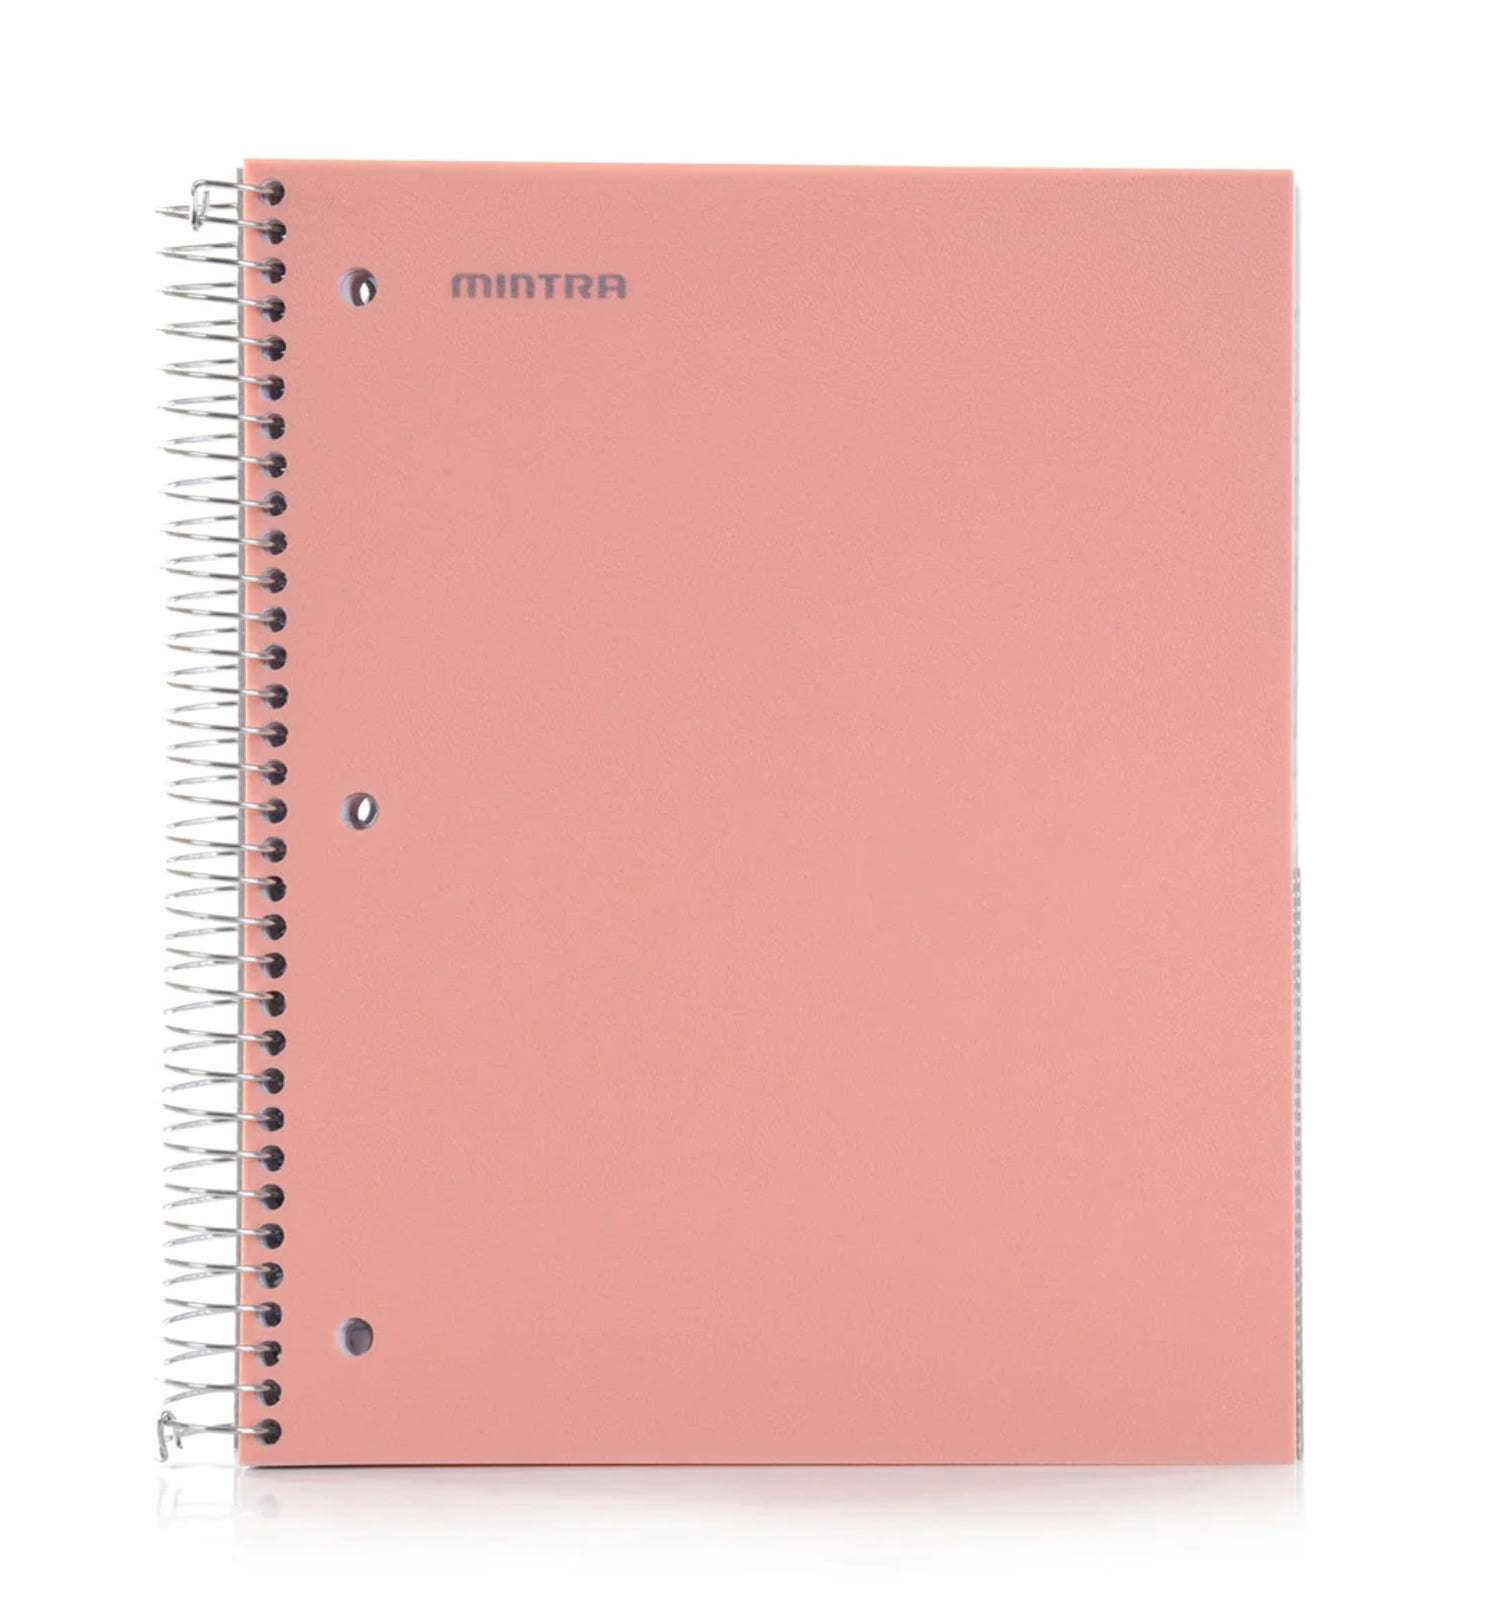 Lined Notebook Spiral Sweet Pastel Colors College Ruled Notebook for  Journaling, 5.12 *6.97*0.39 inches - Kroger